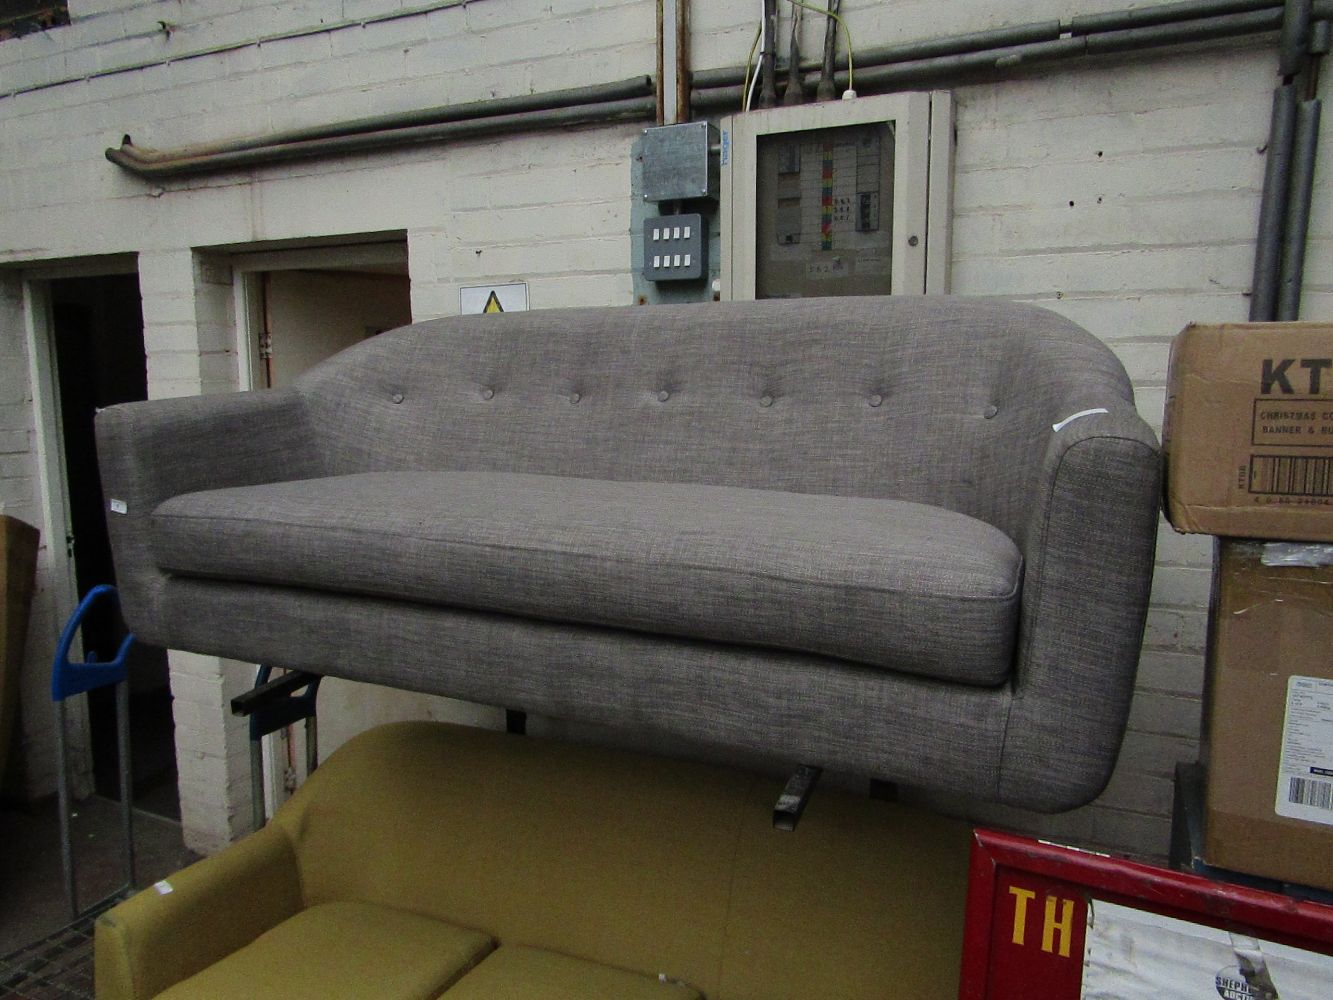 New Delivery of Furniture and Sofas From Swoon, Made.com and Cox and Cox